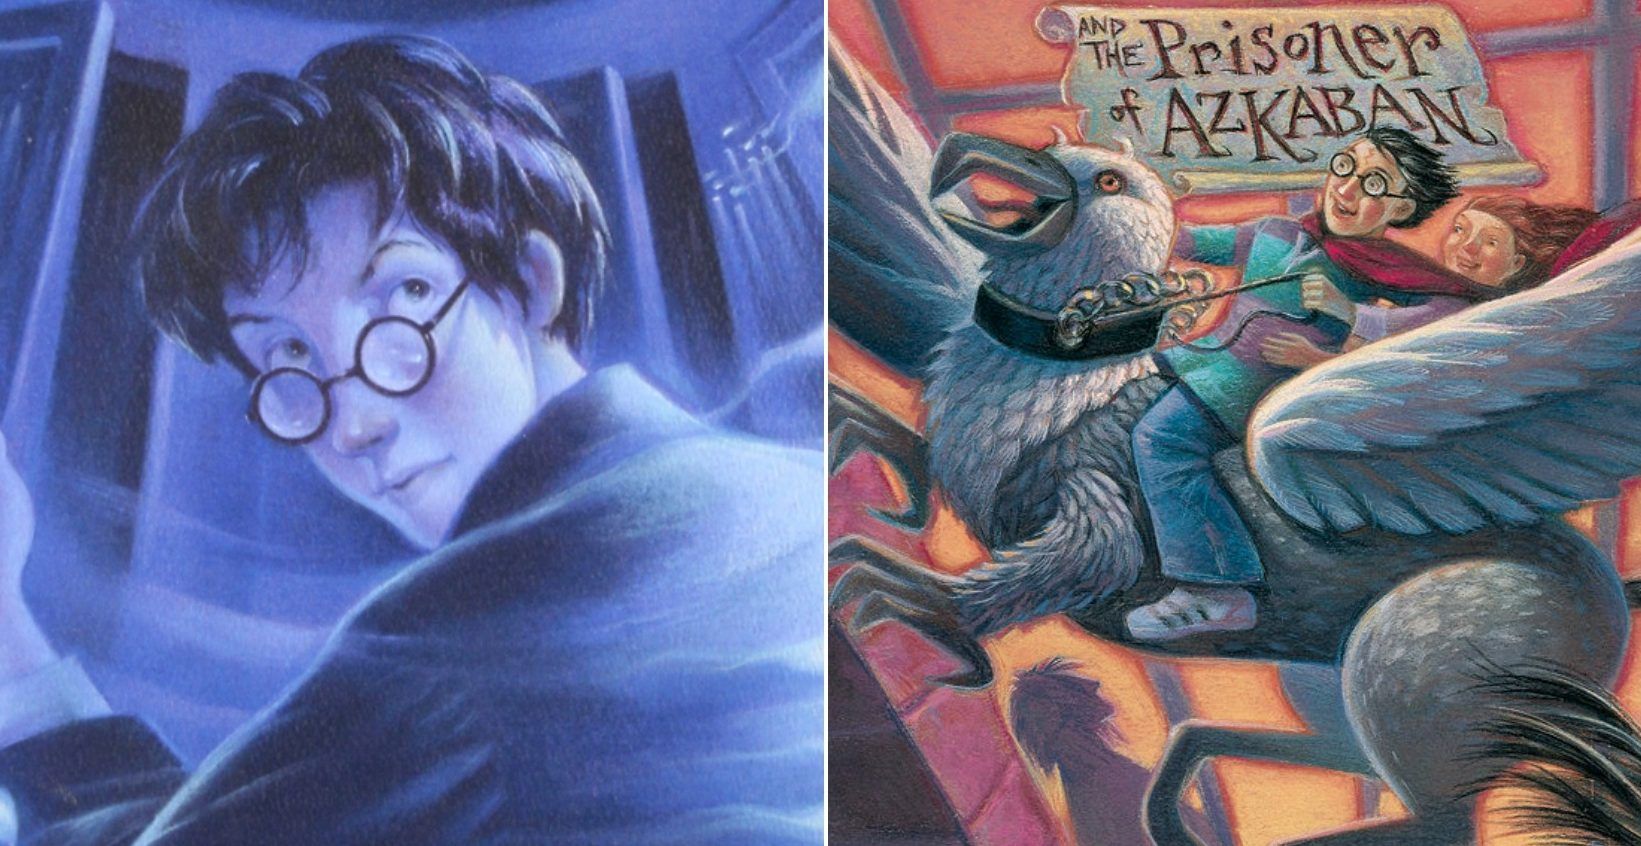 Covers of two Harry Potter books